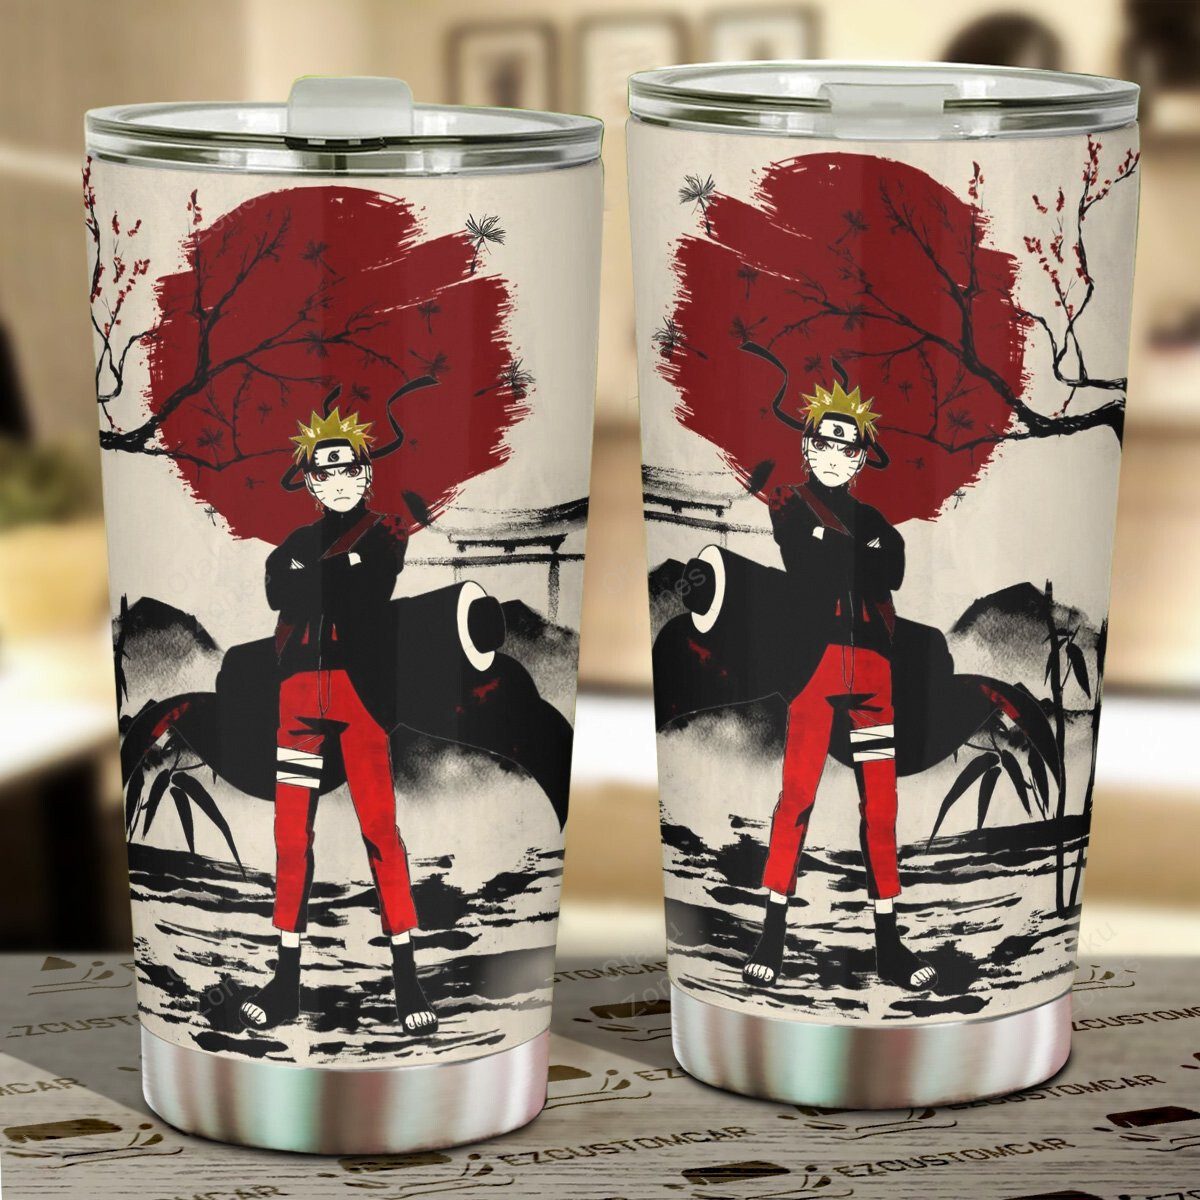 Go ahead and order your new tumbler now! 42